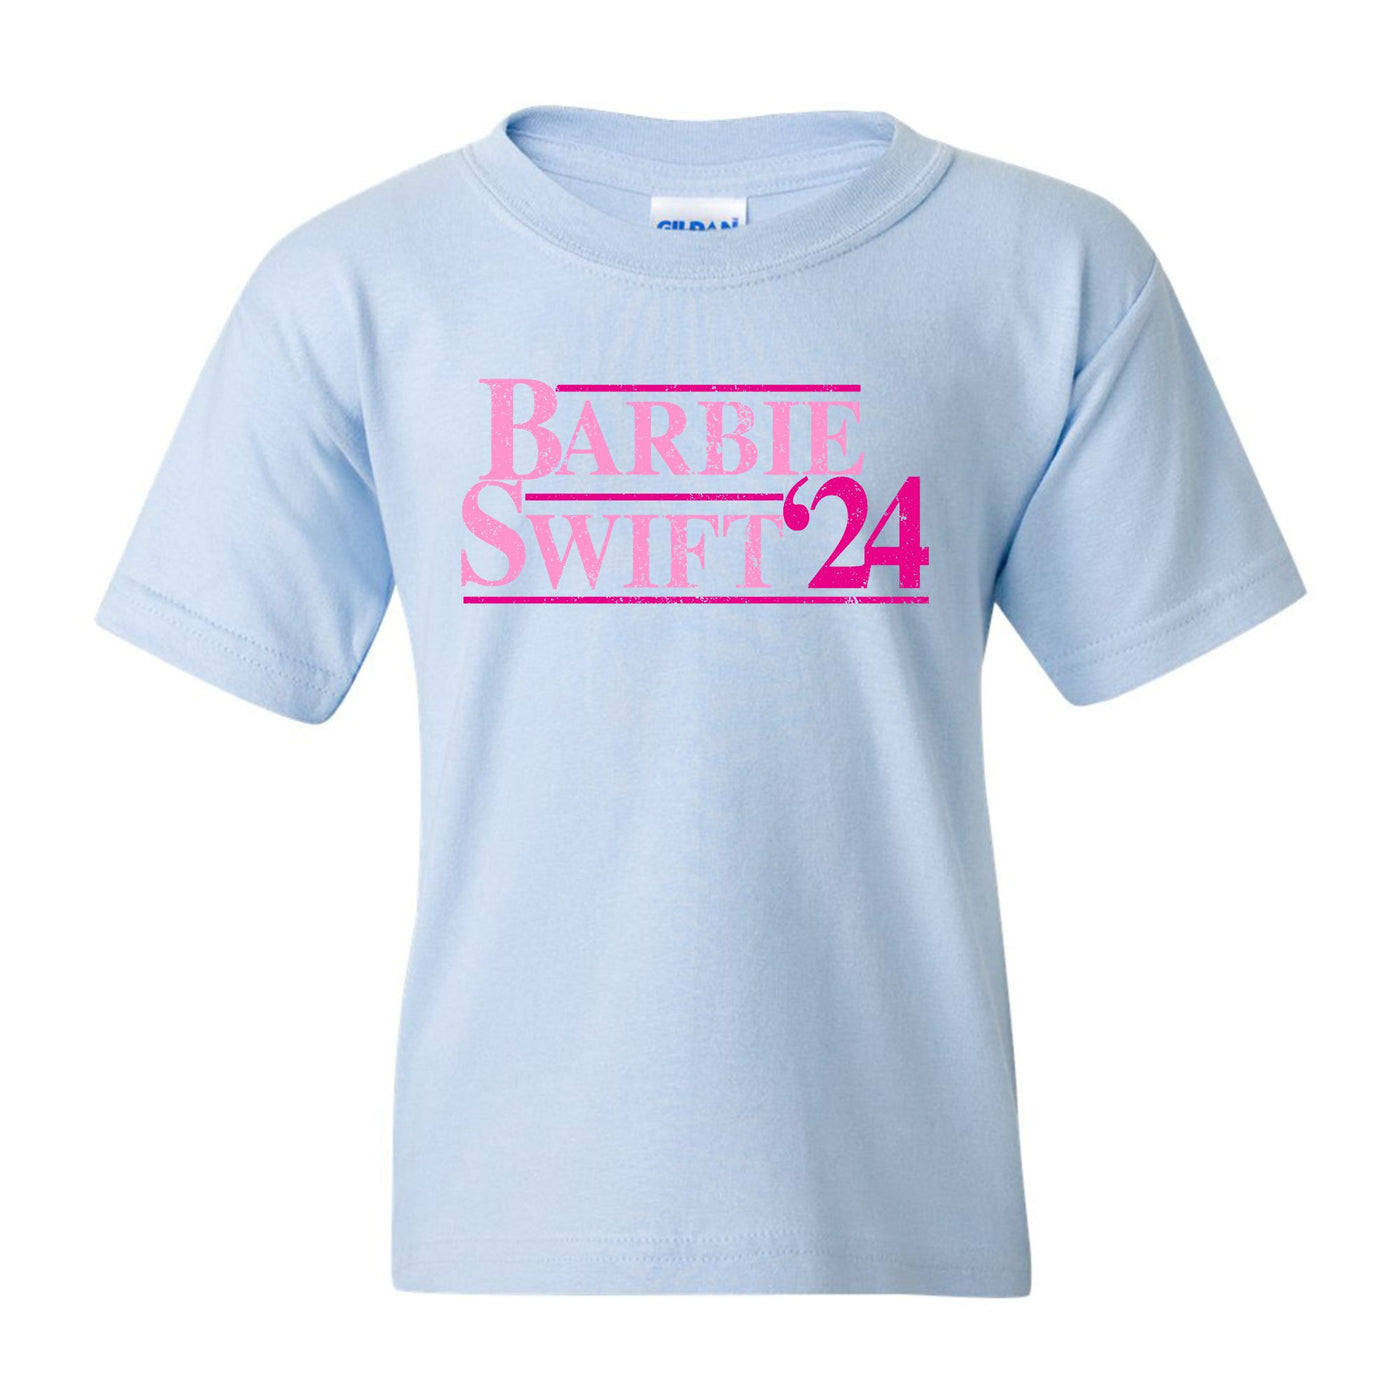 Kids 'Girly Campaign '24' T-Shirt